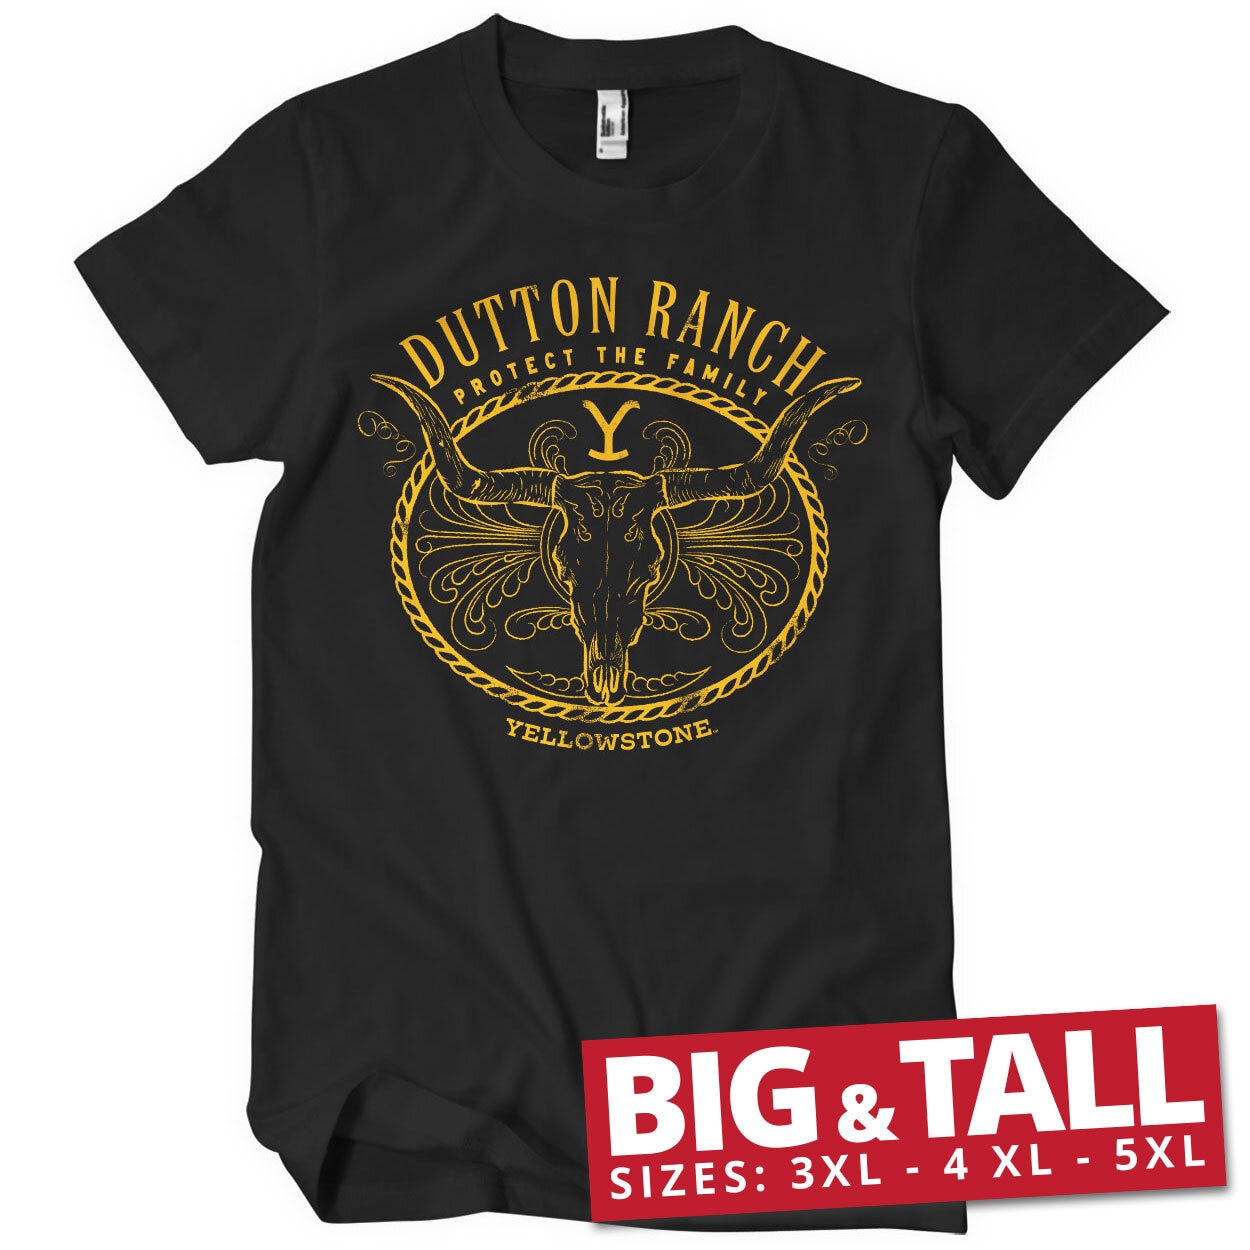 Yellowstone - Protect The Family Big & Tall T-Shirt